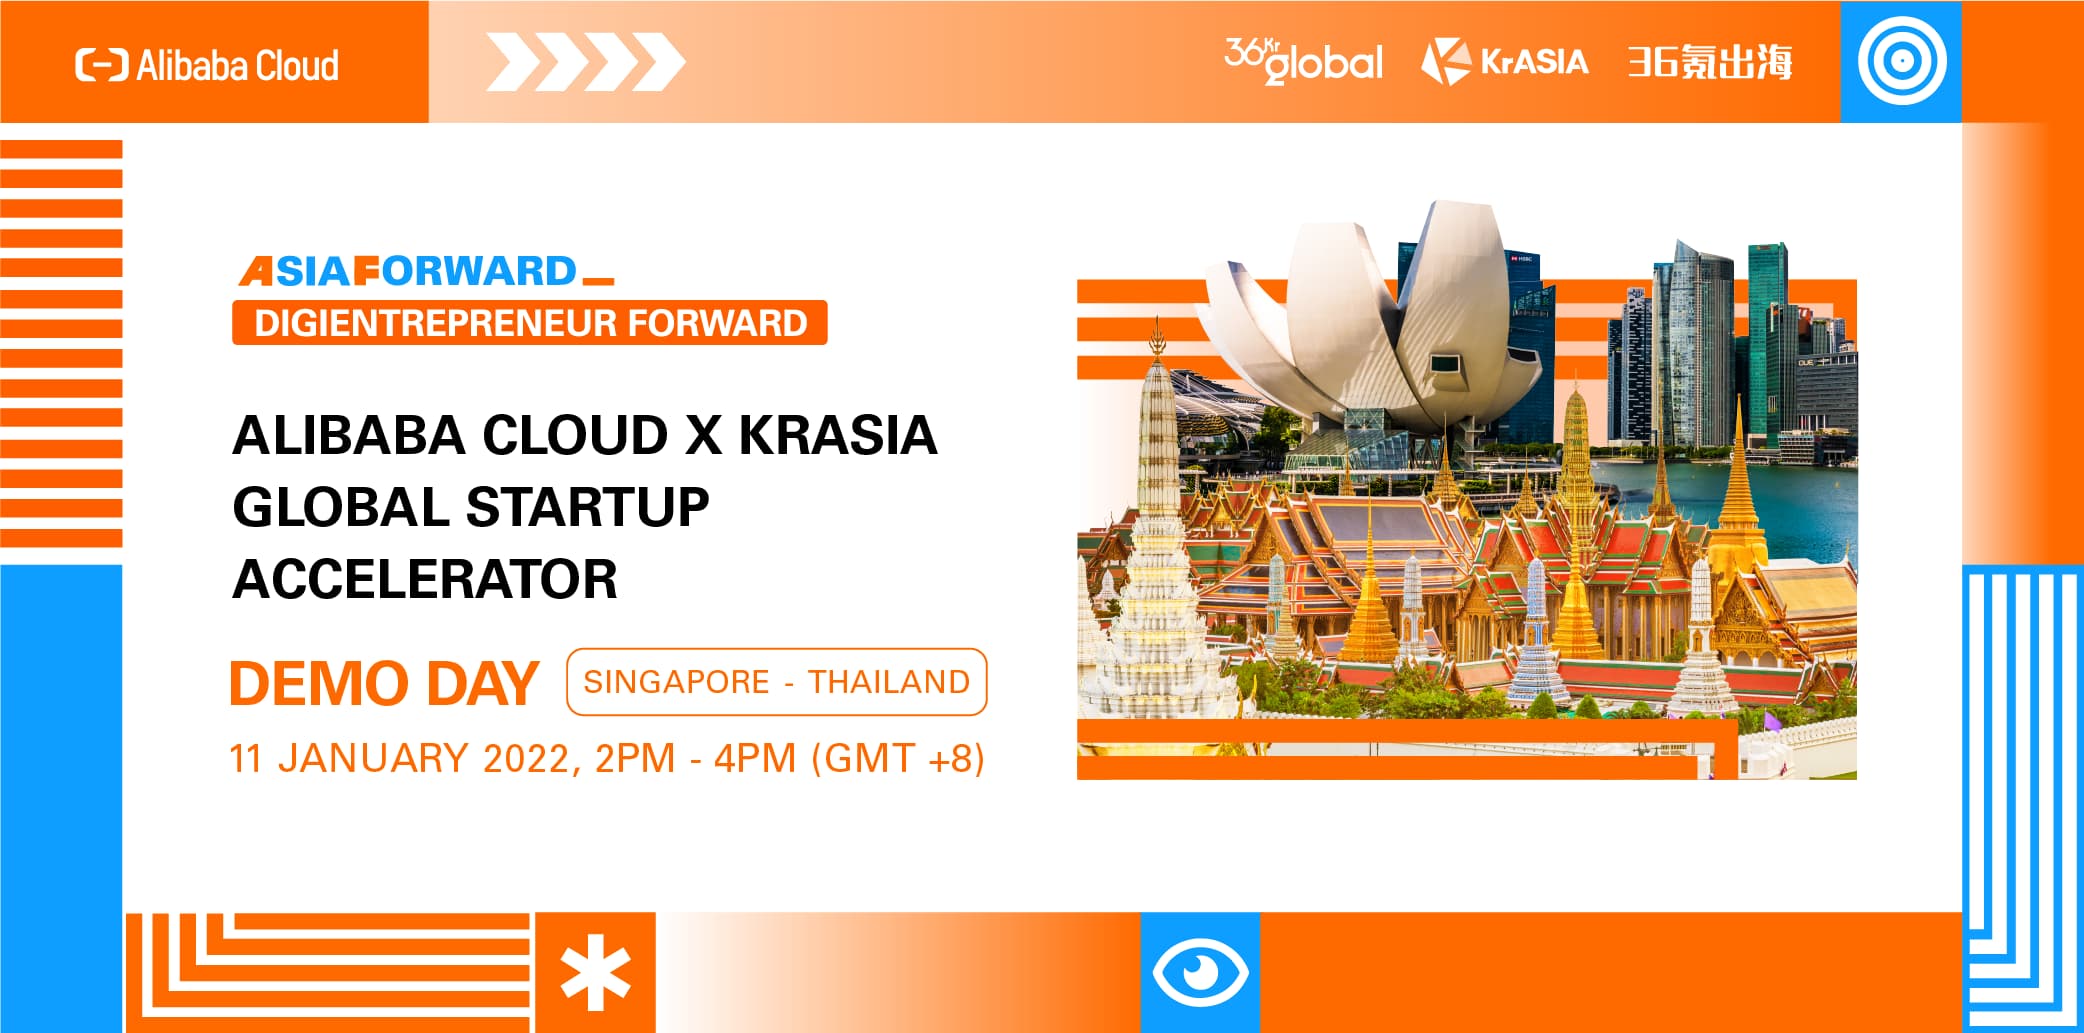 Registration opens for the Alibaba Cloud x KrASIA Global Startup Accelerator Singapore-Thailand joint Demo Day